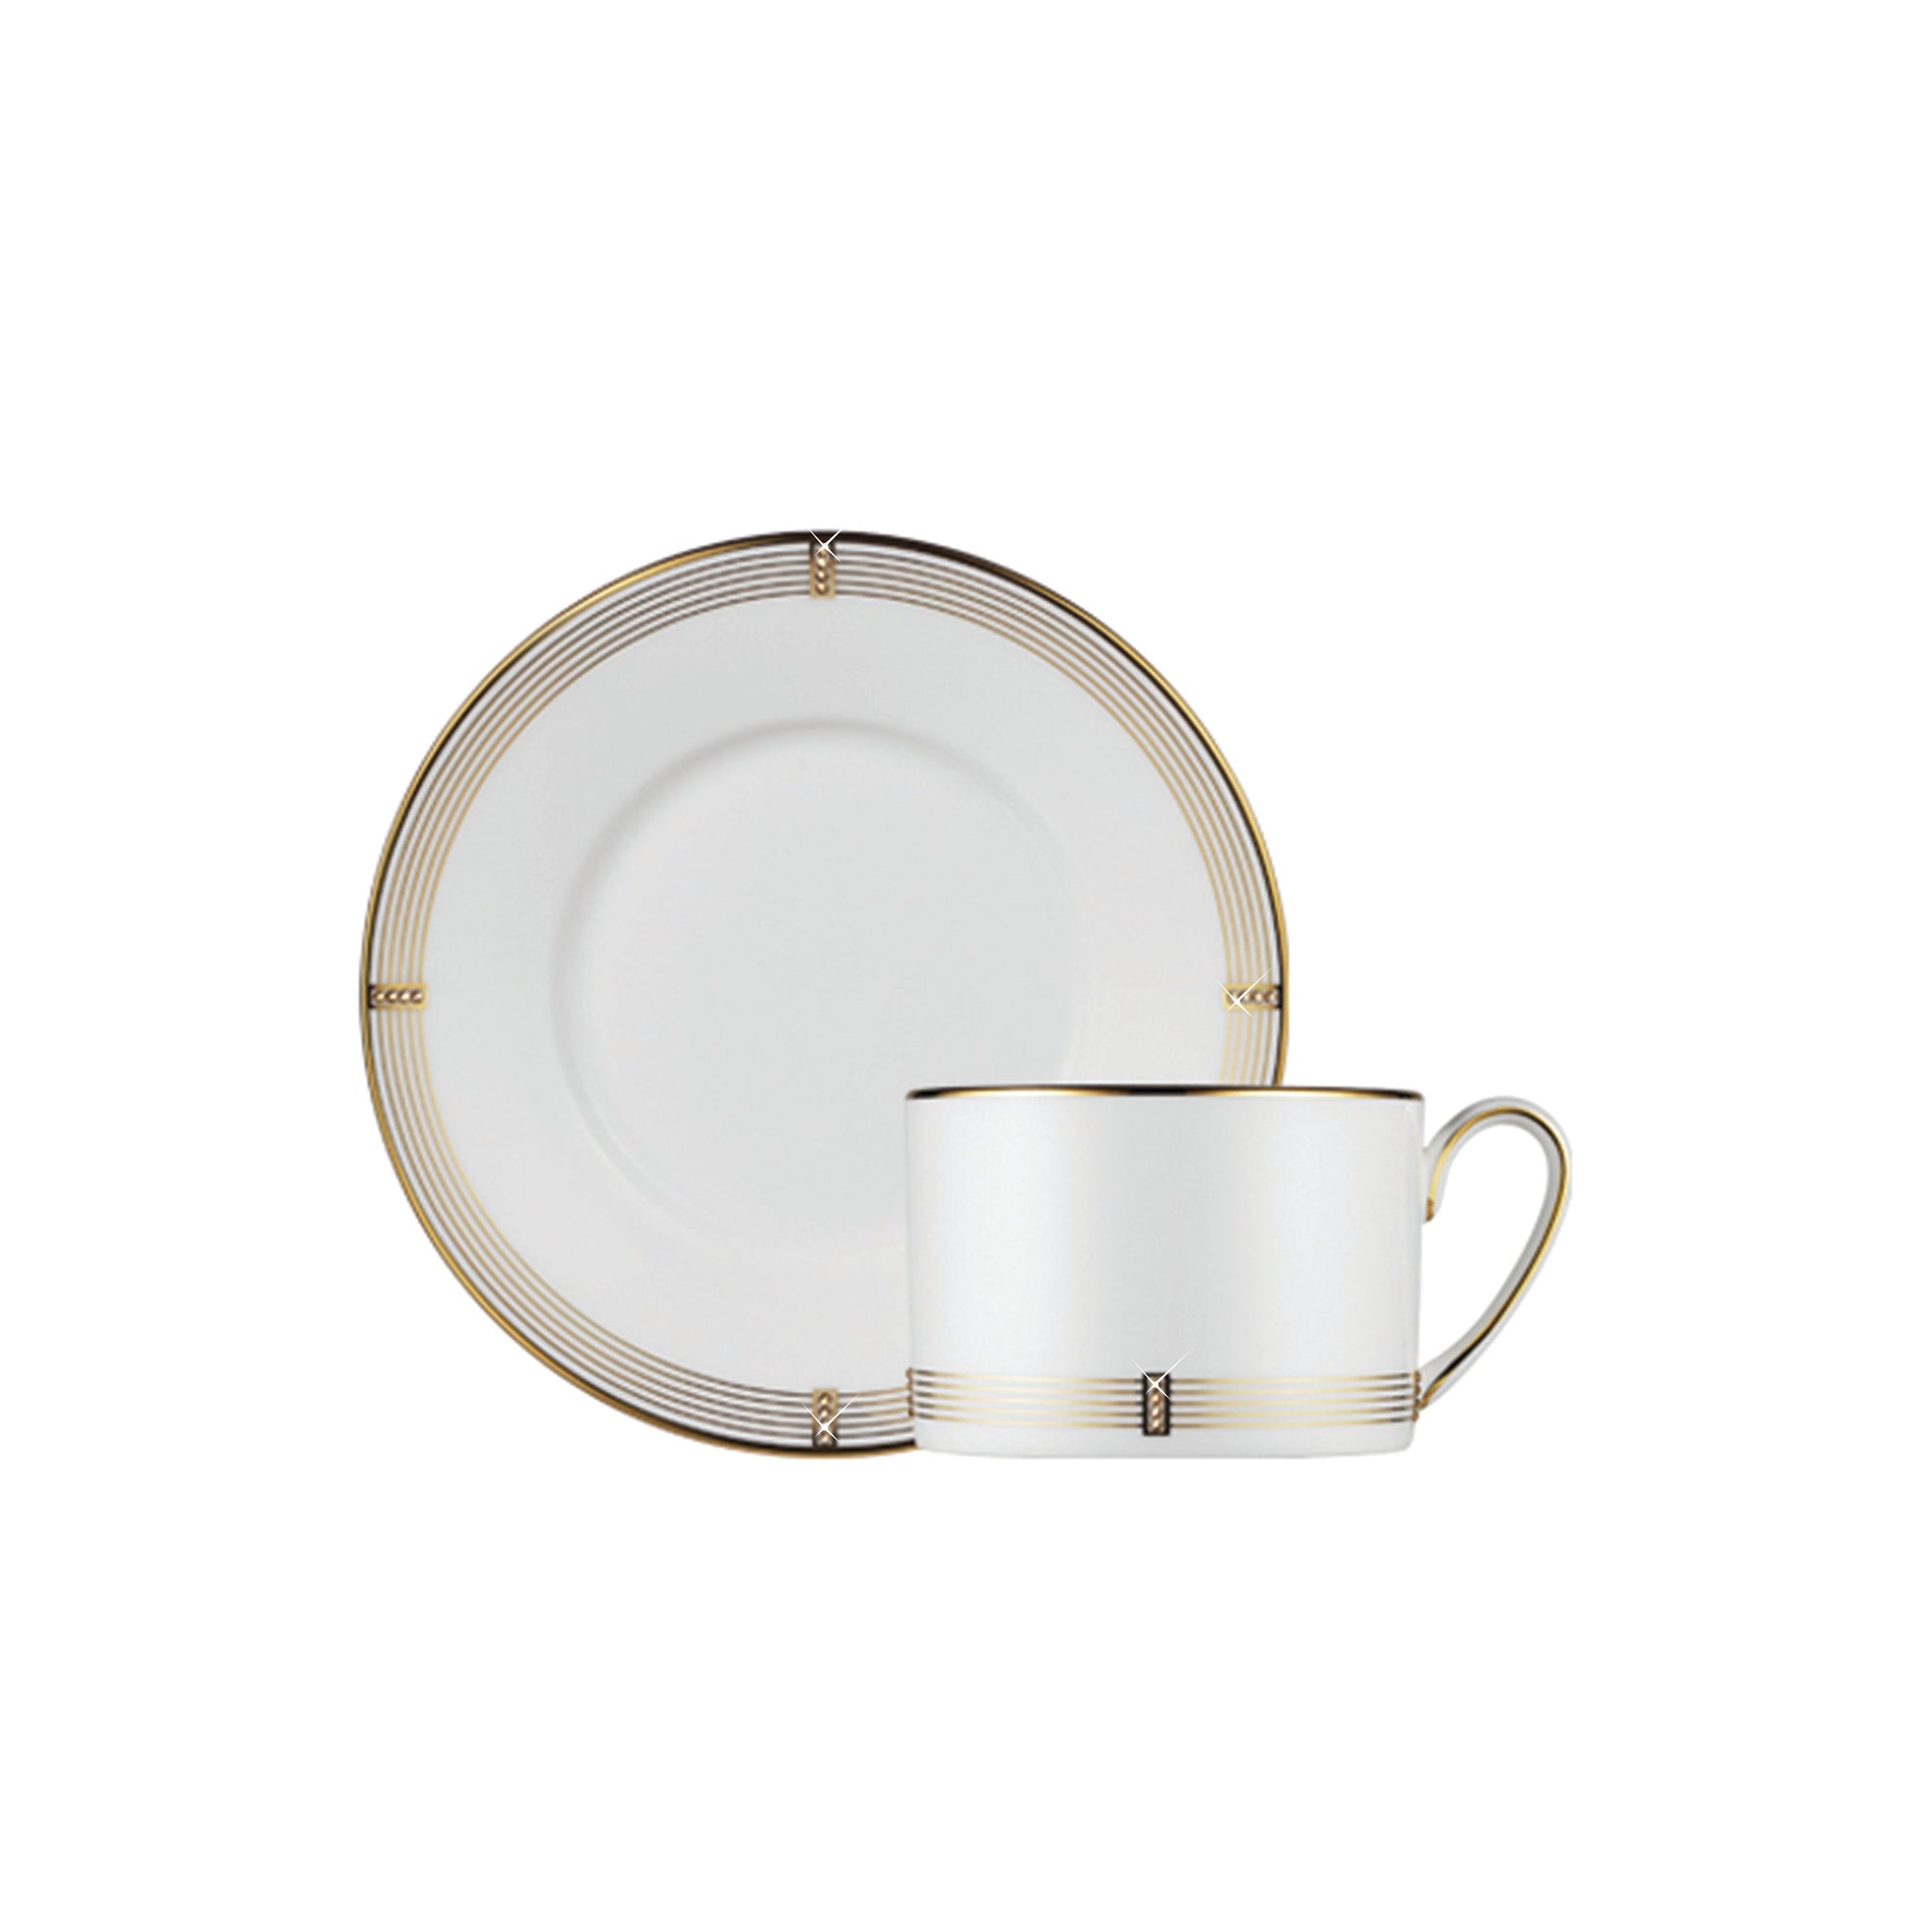 Prouna Regency Gold Tea Cup & Saucer White Background Photo